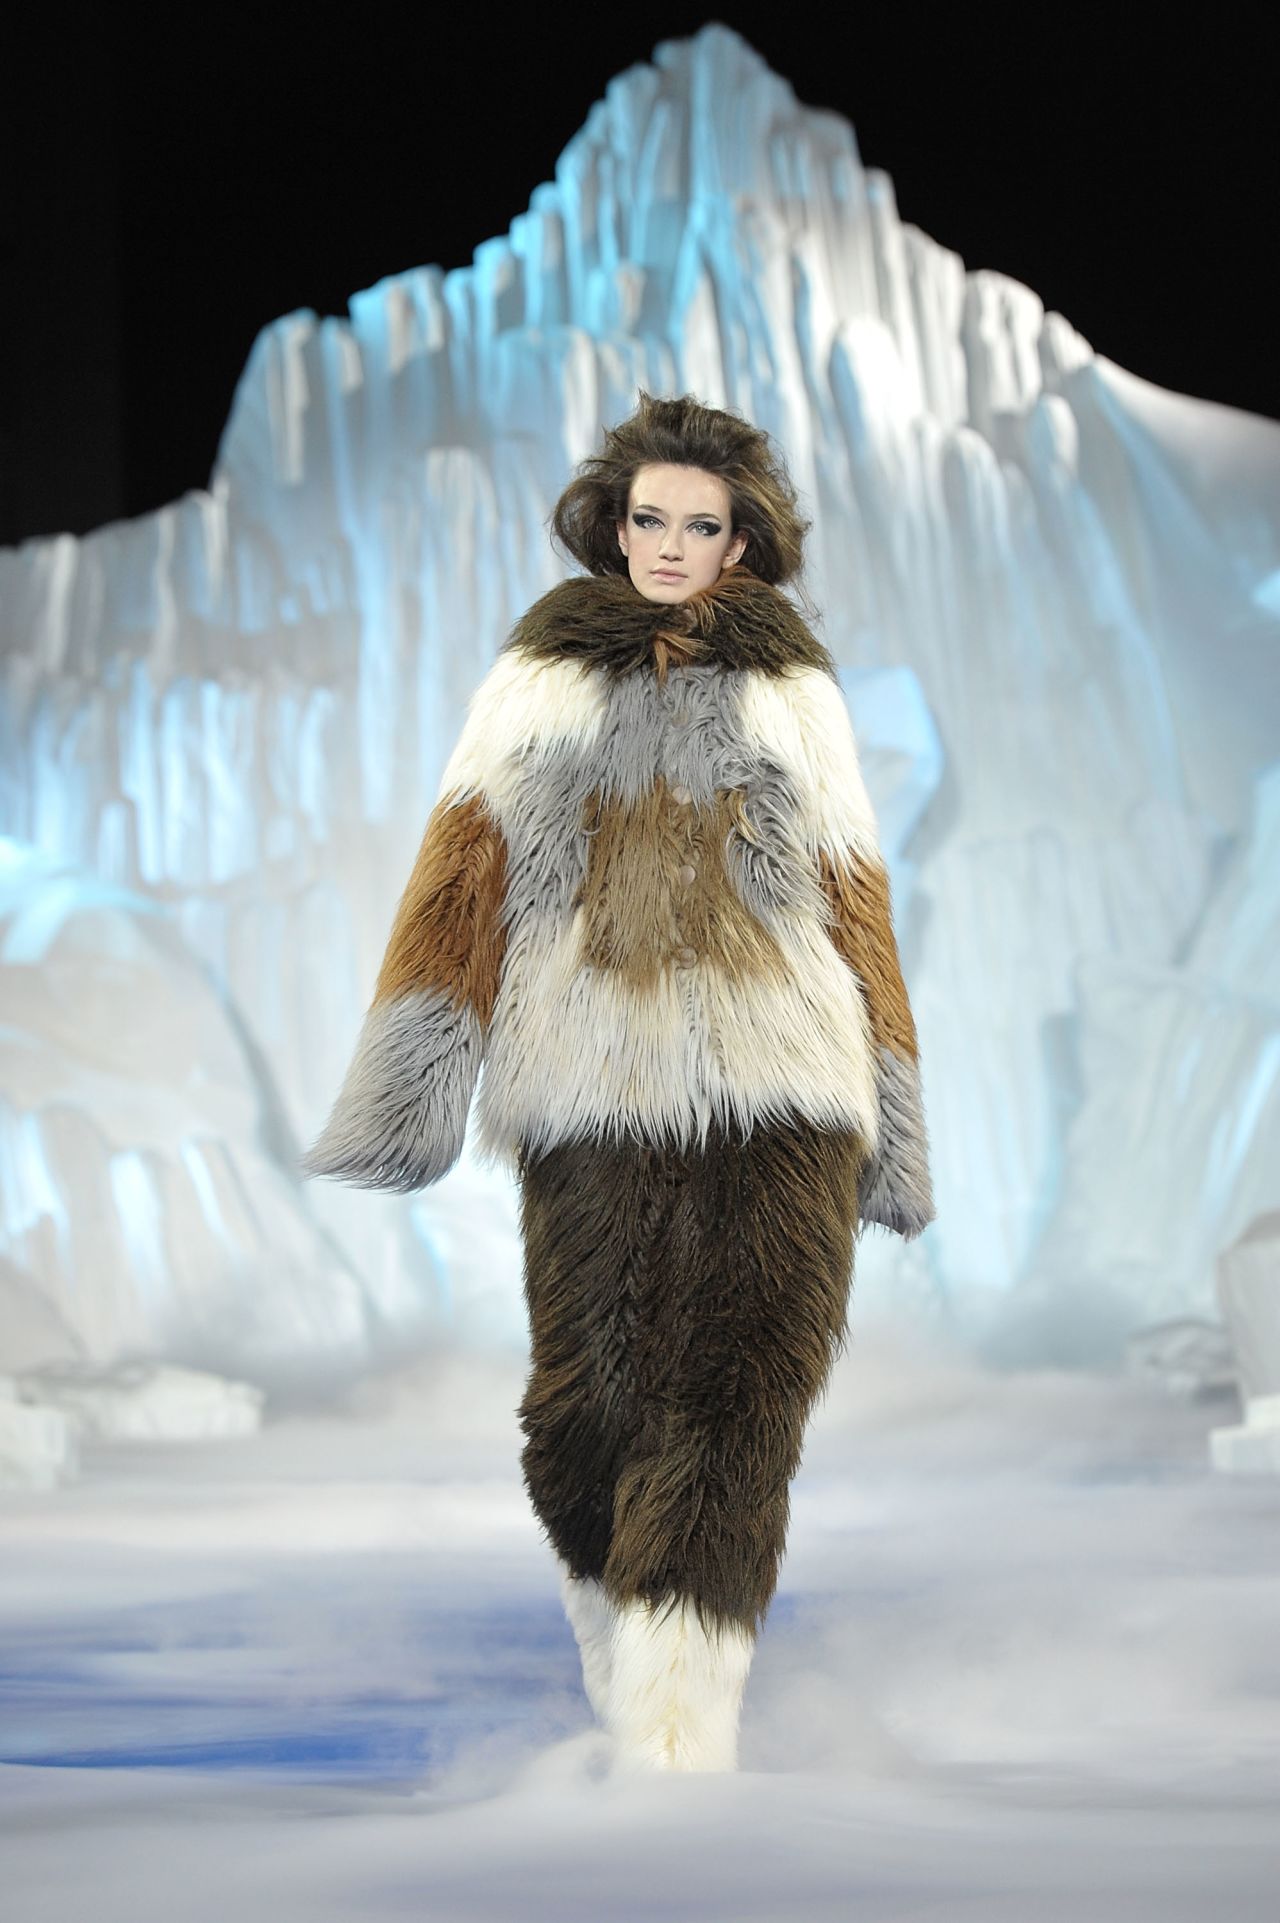 Chanel Fall-Winter 2010 collection showed at Yoyogi National Gymnasium on June 23, 2010 in Tokyo, Japan. The fur used in the show was faux fur.